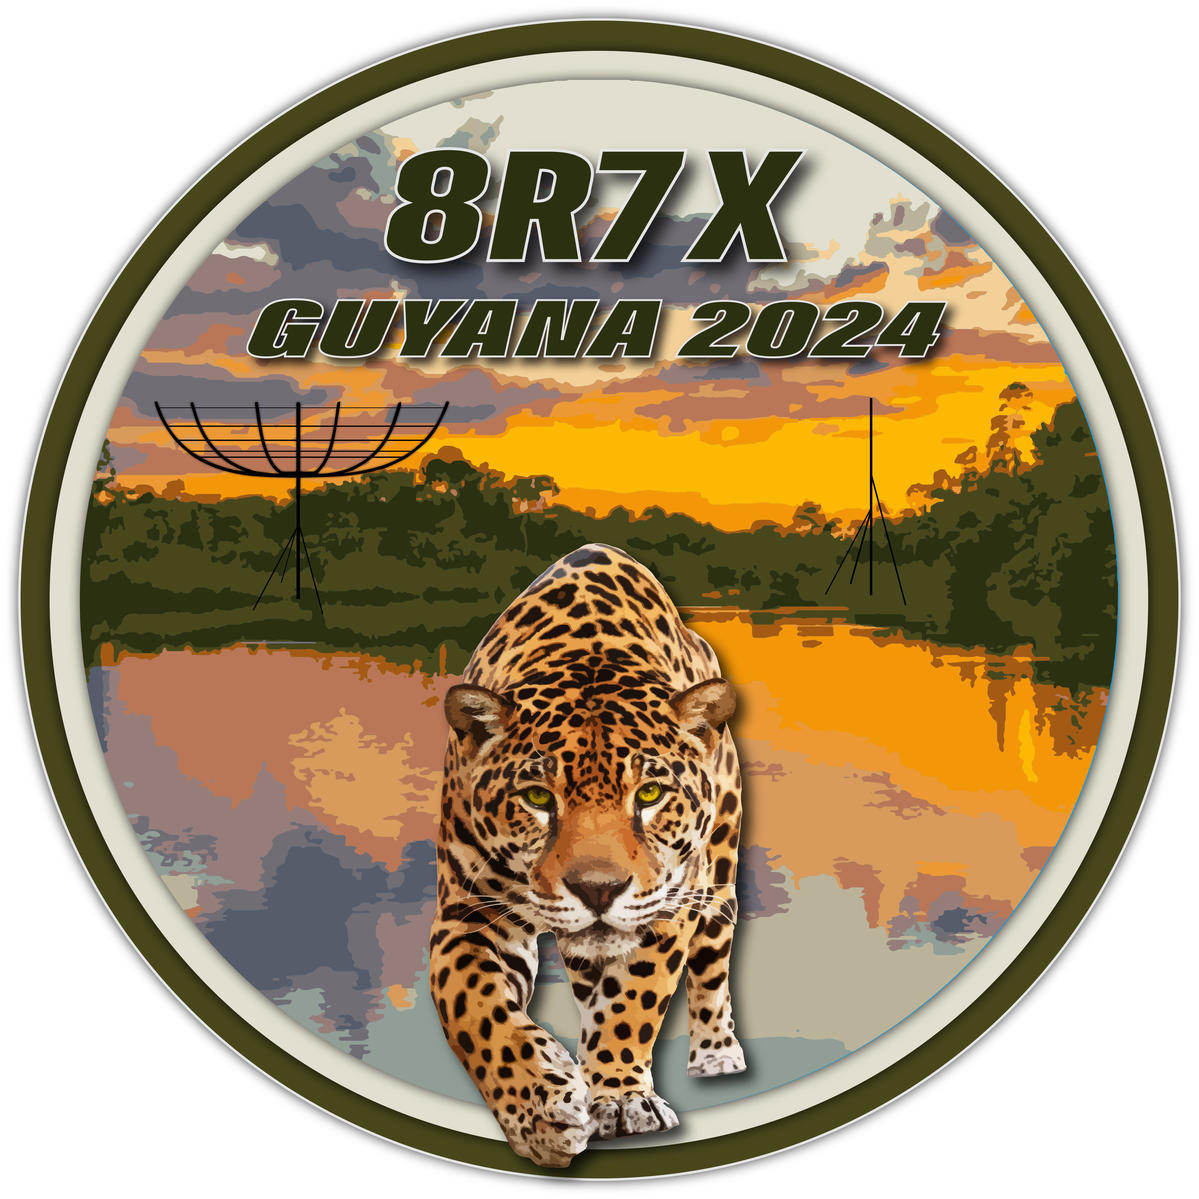 8R7X - Guyana 2024 **QRT**
The 8R7X Team are now QRT from their DXpedition in Georgetown, Guyana. The full and final log has been uploaded to Clublog & M0OXO OQRS.

Website 8r-2024.com
QSL Service 8r-2024.com/qsl-service/
Log m0oxo.com/oqrs/logsearch…